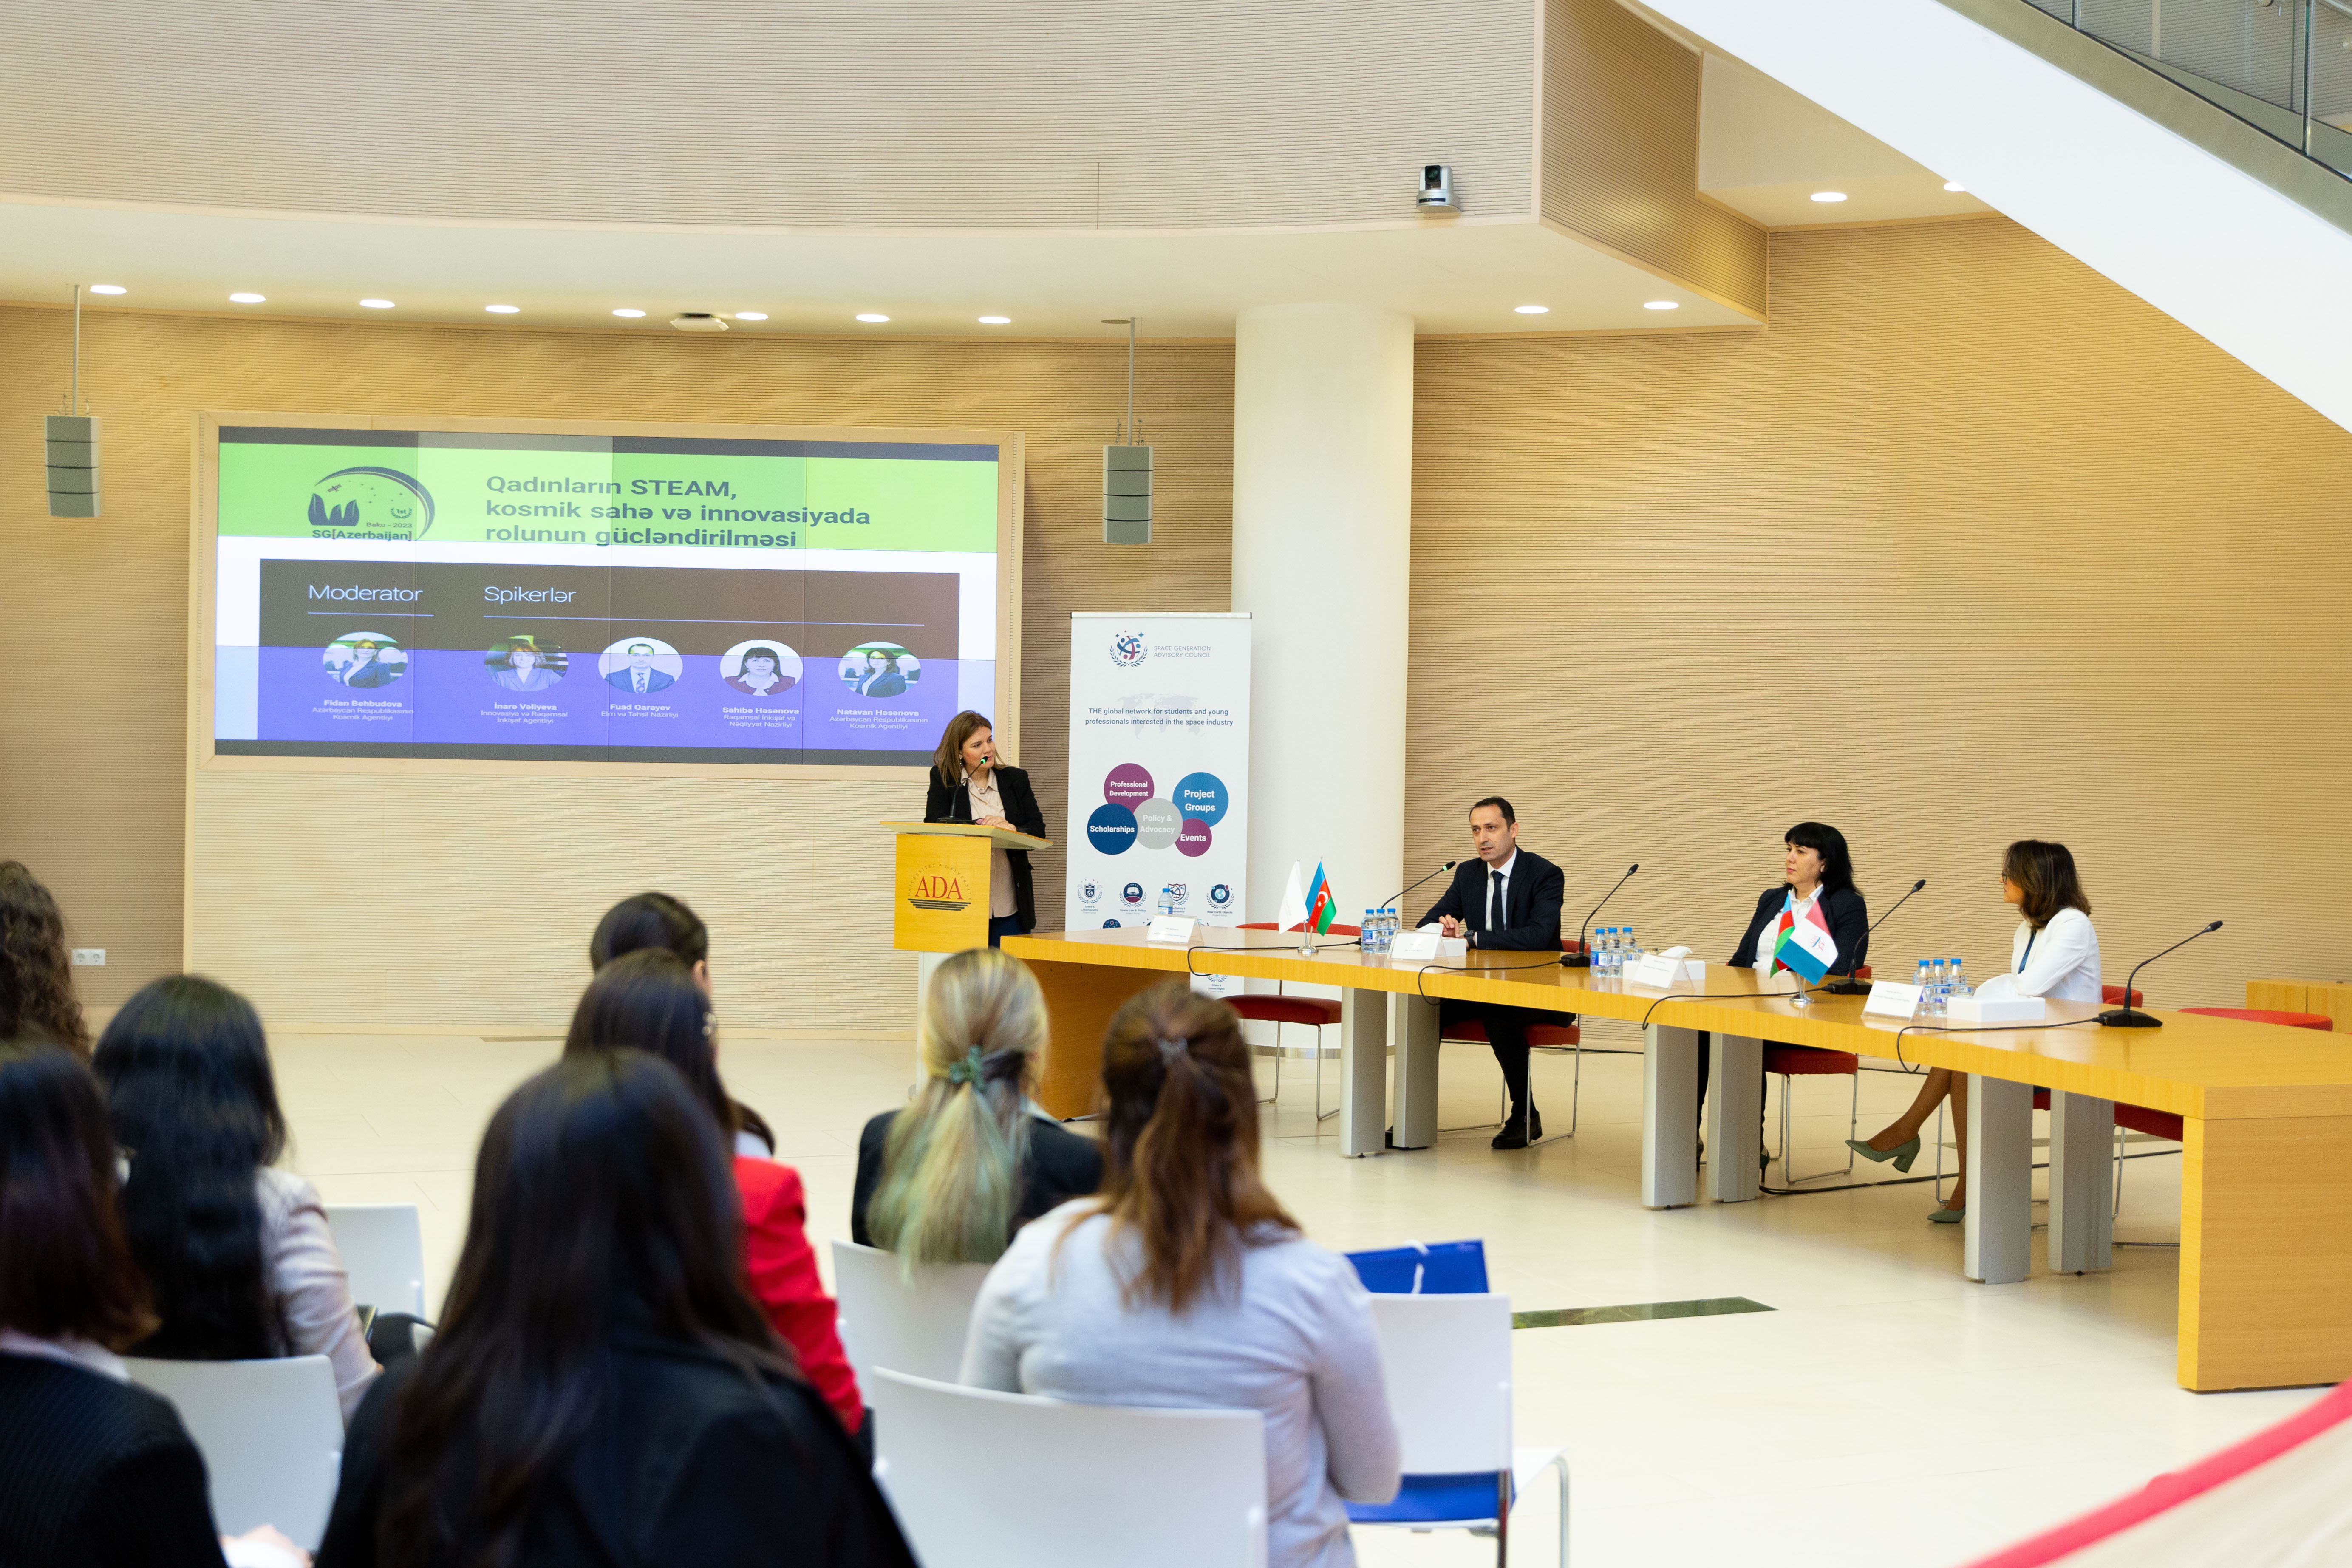 Baku hosts Space Generation Advisory Council  local event for the first time